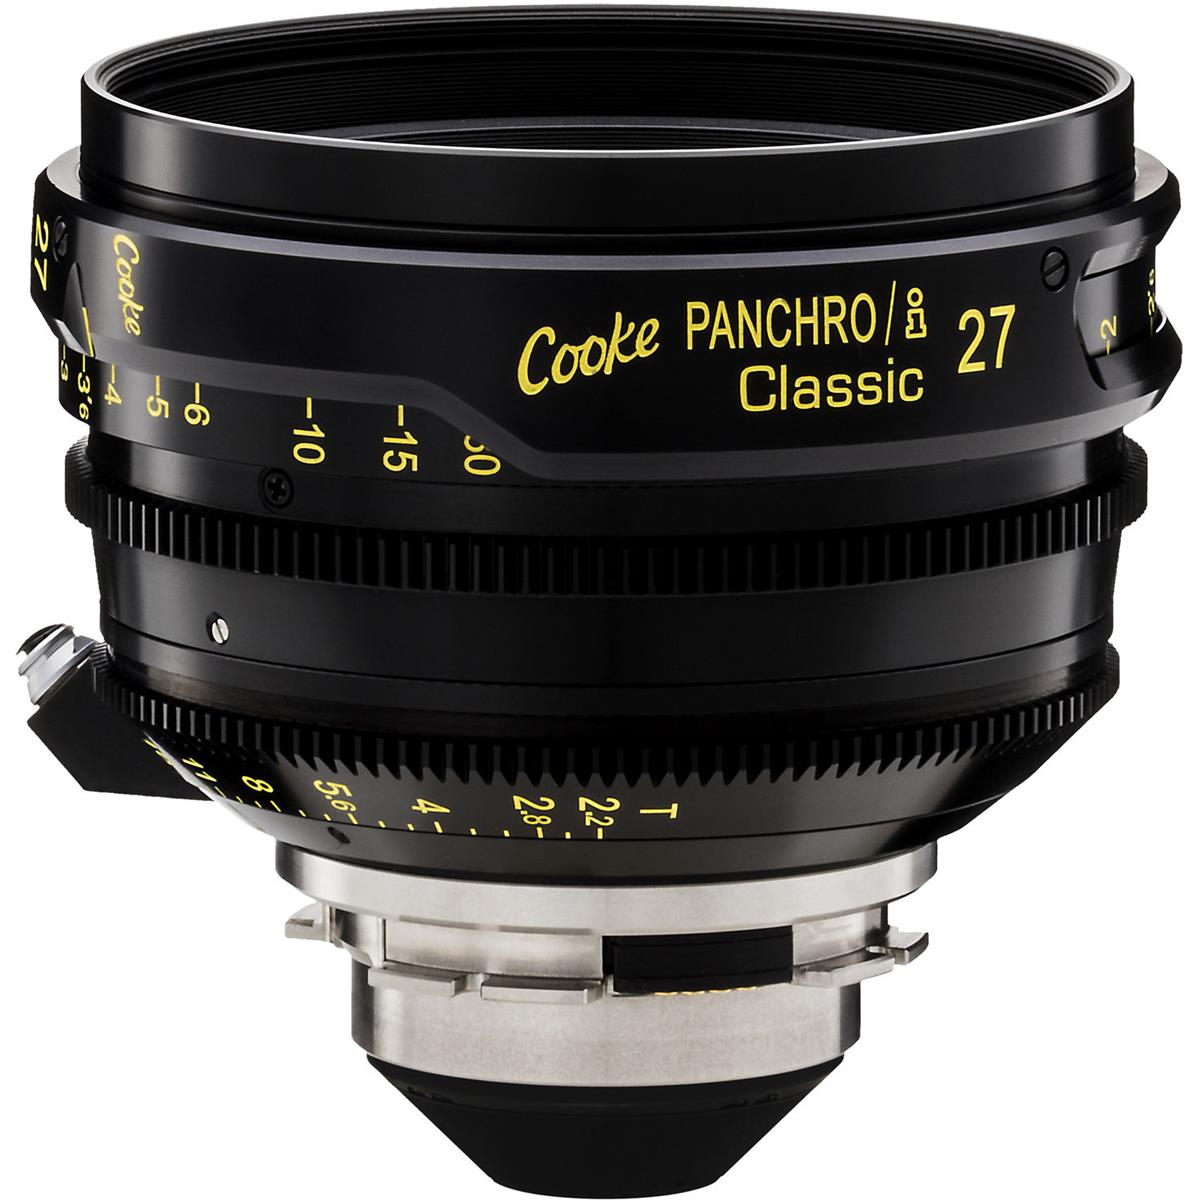 Cooke 27mm T2.2 Panchro/i Classic Prime Lens for PL Mount, Meter -  CKEPC 27M